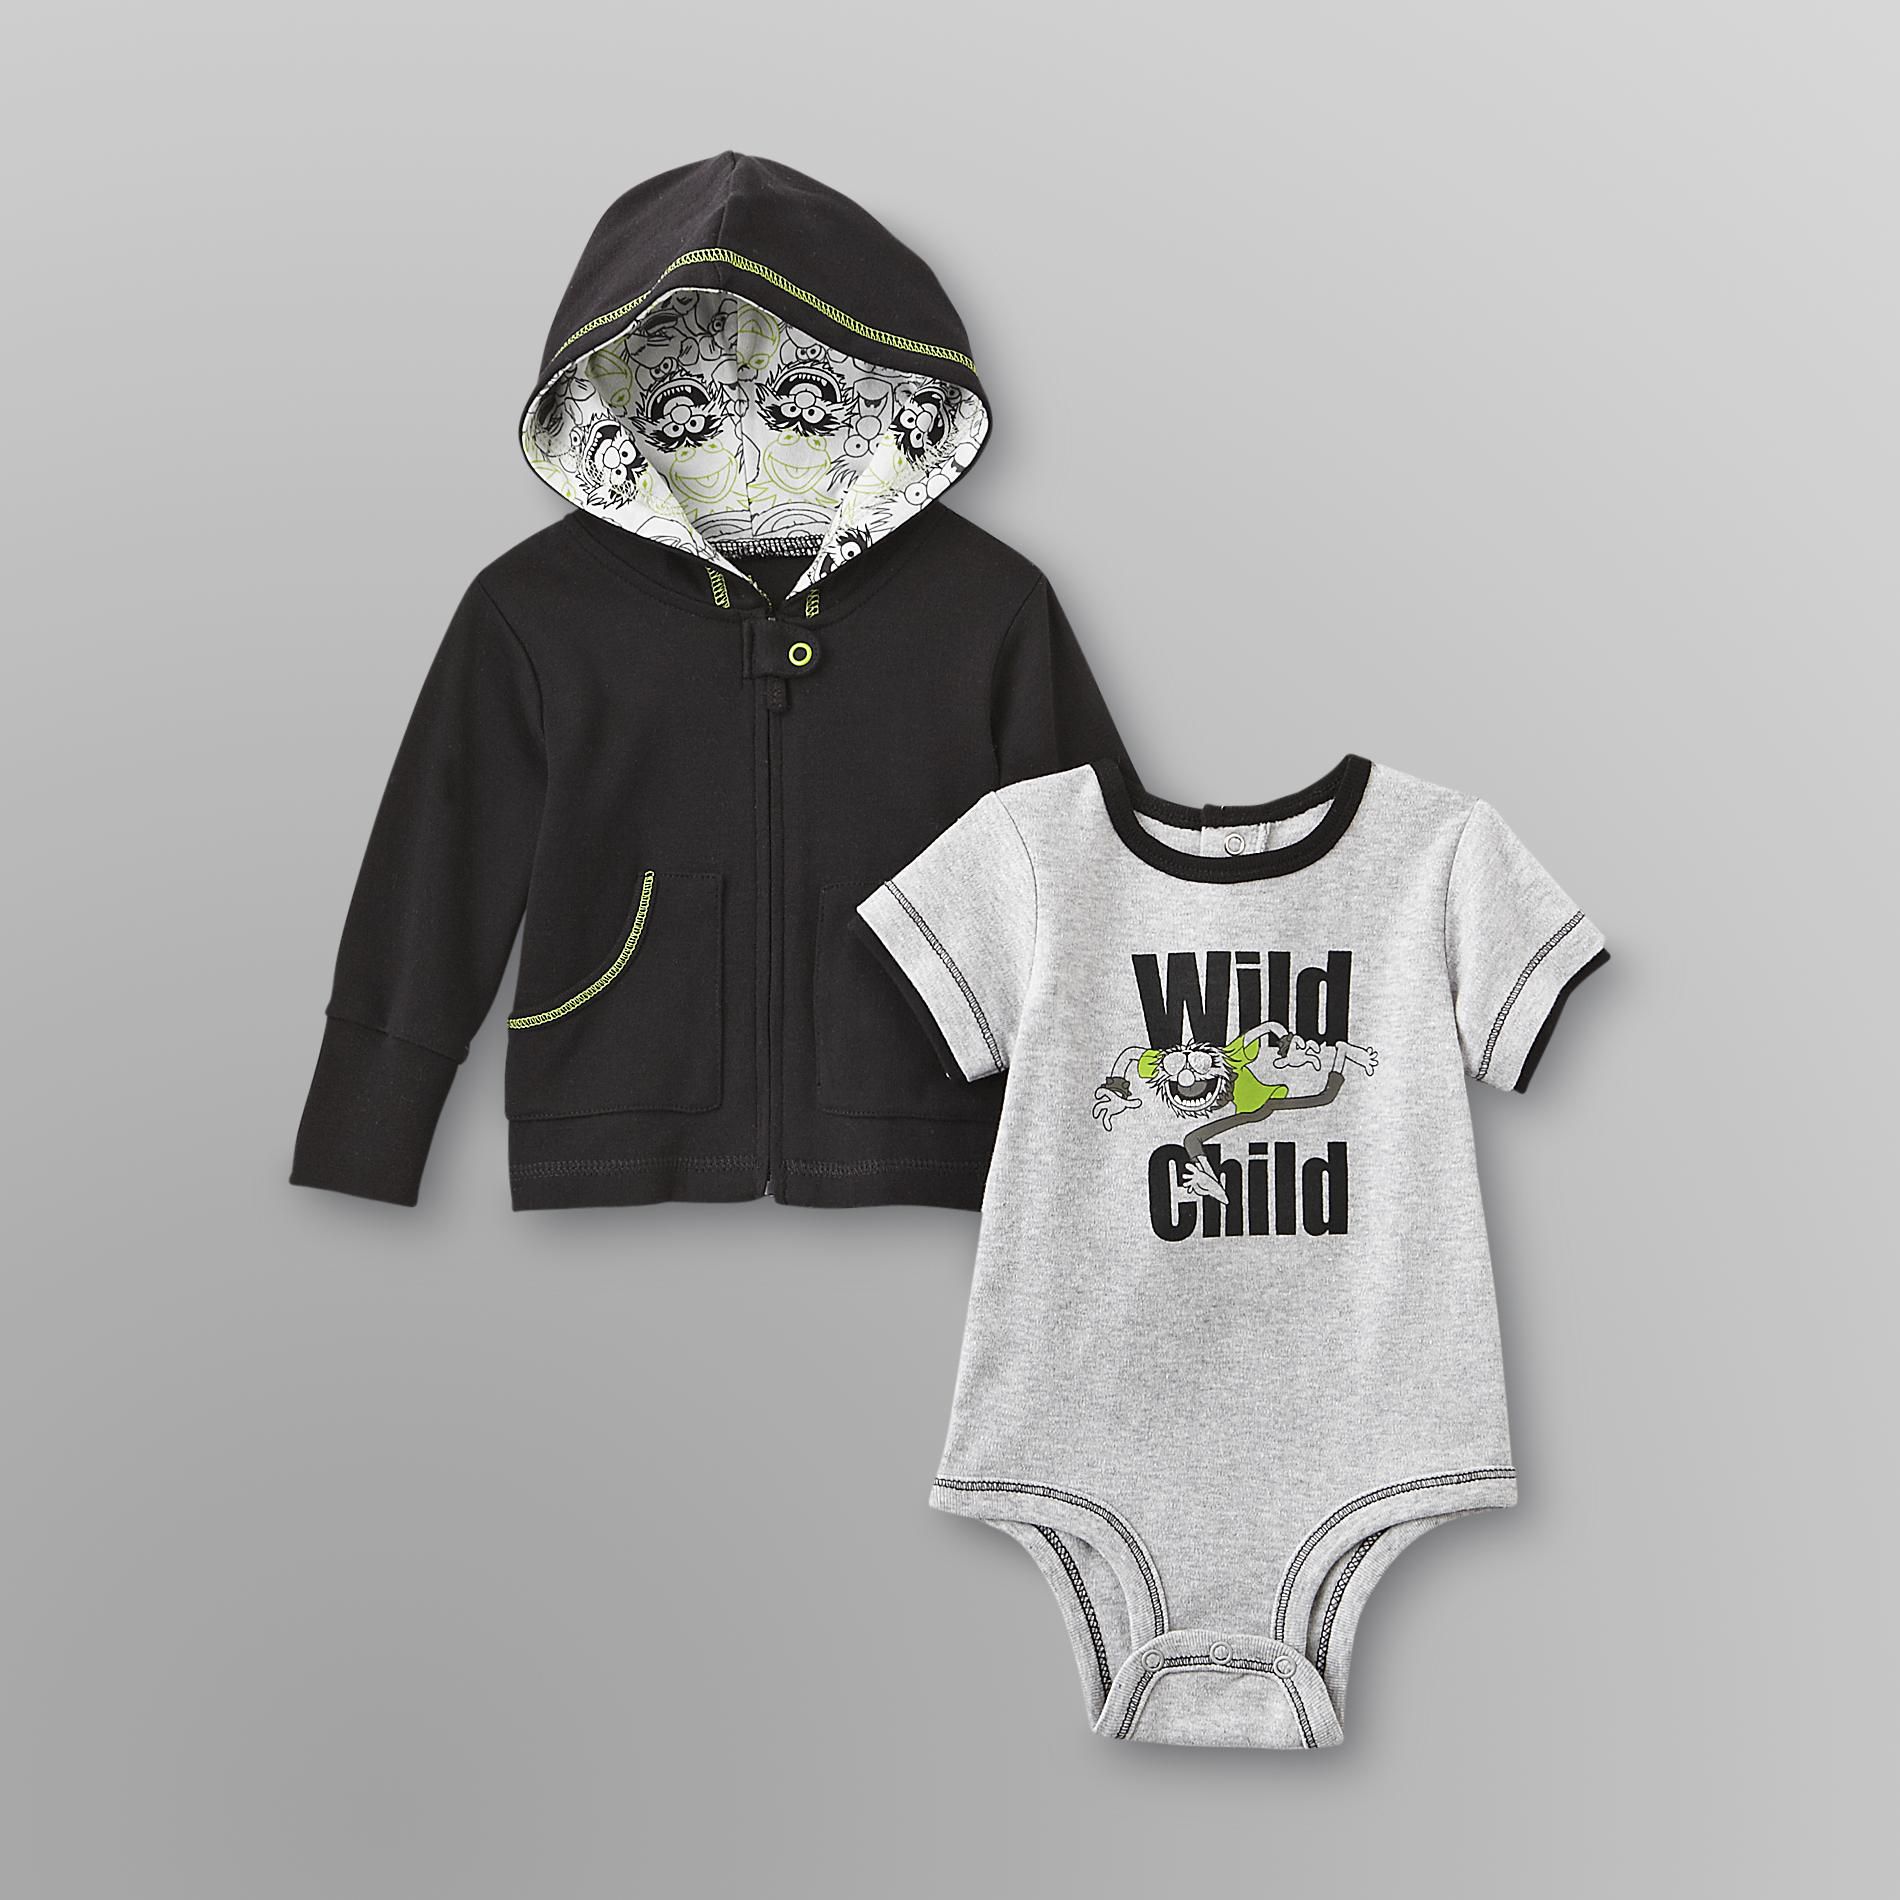 The Muppets Muppets Infant Boy's Bodysuit & Hoodie Jacket